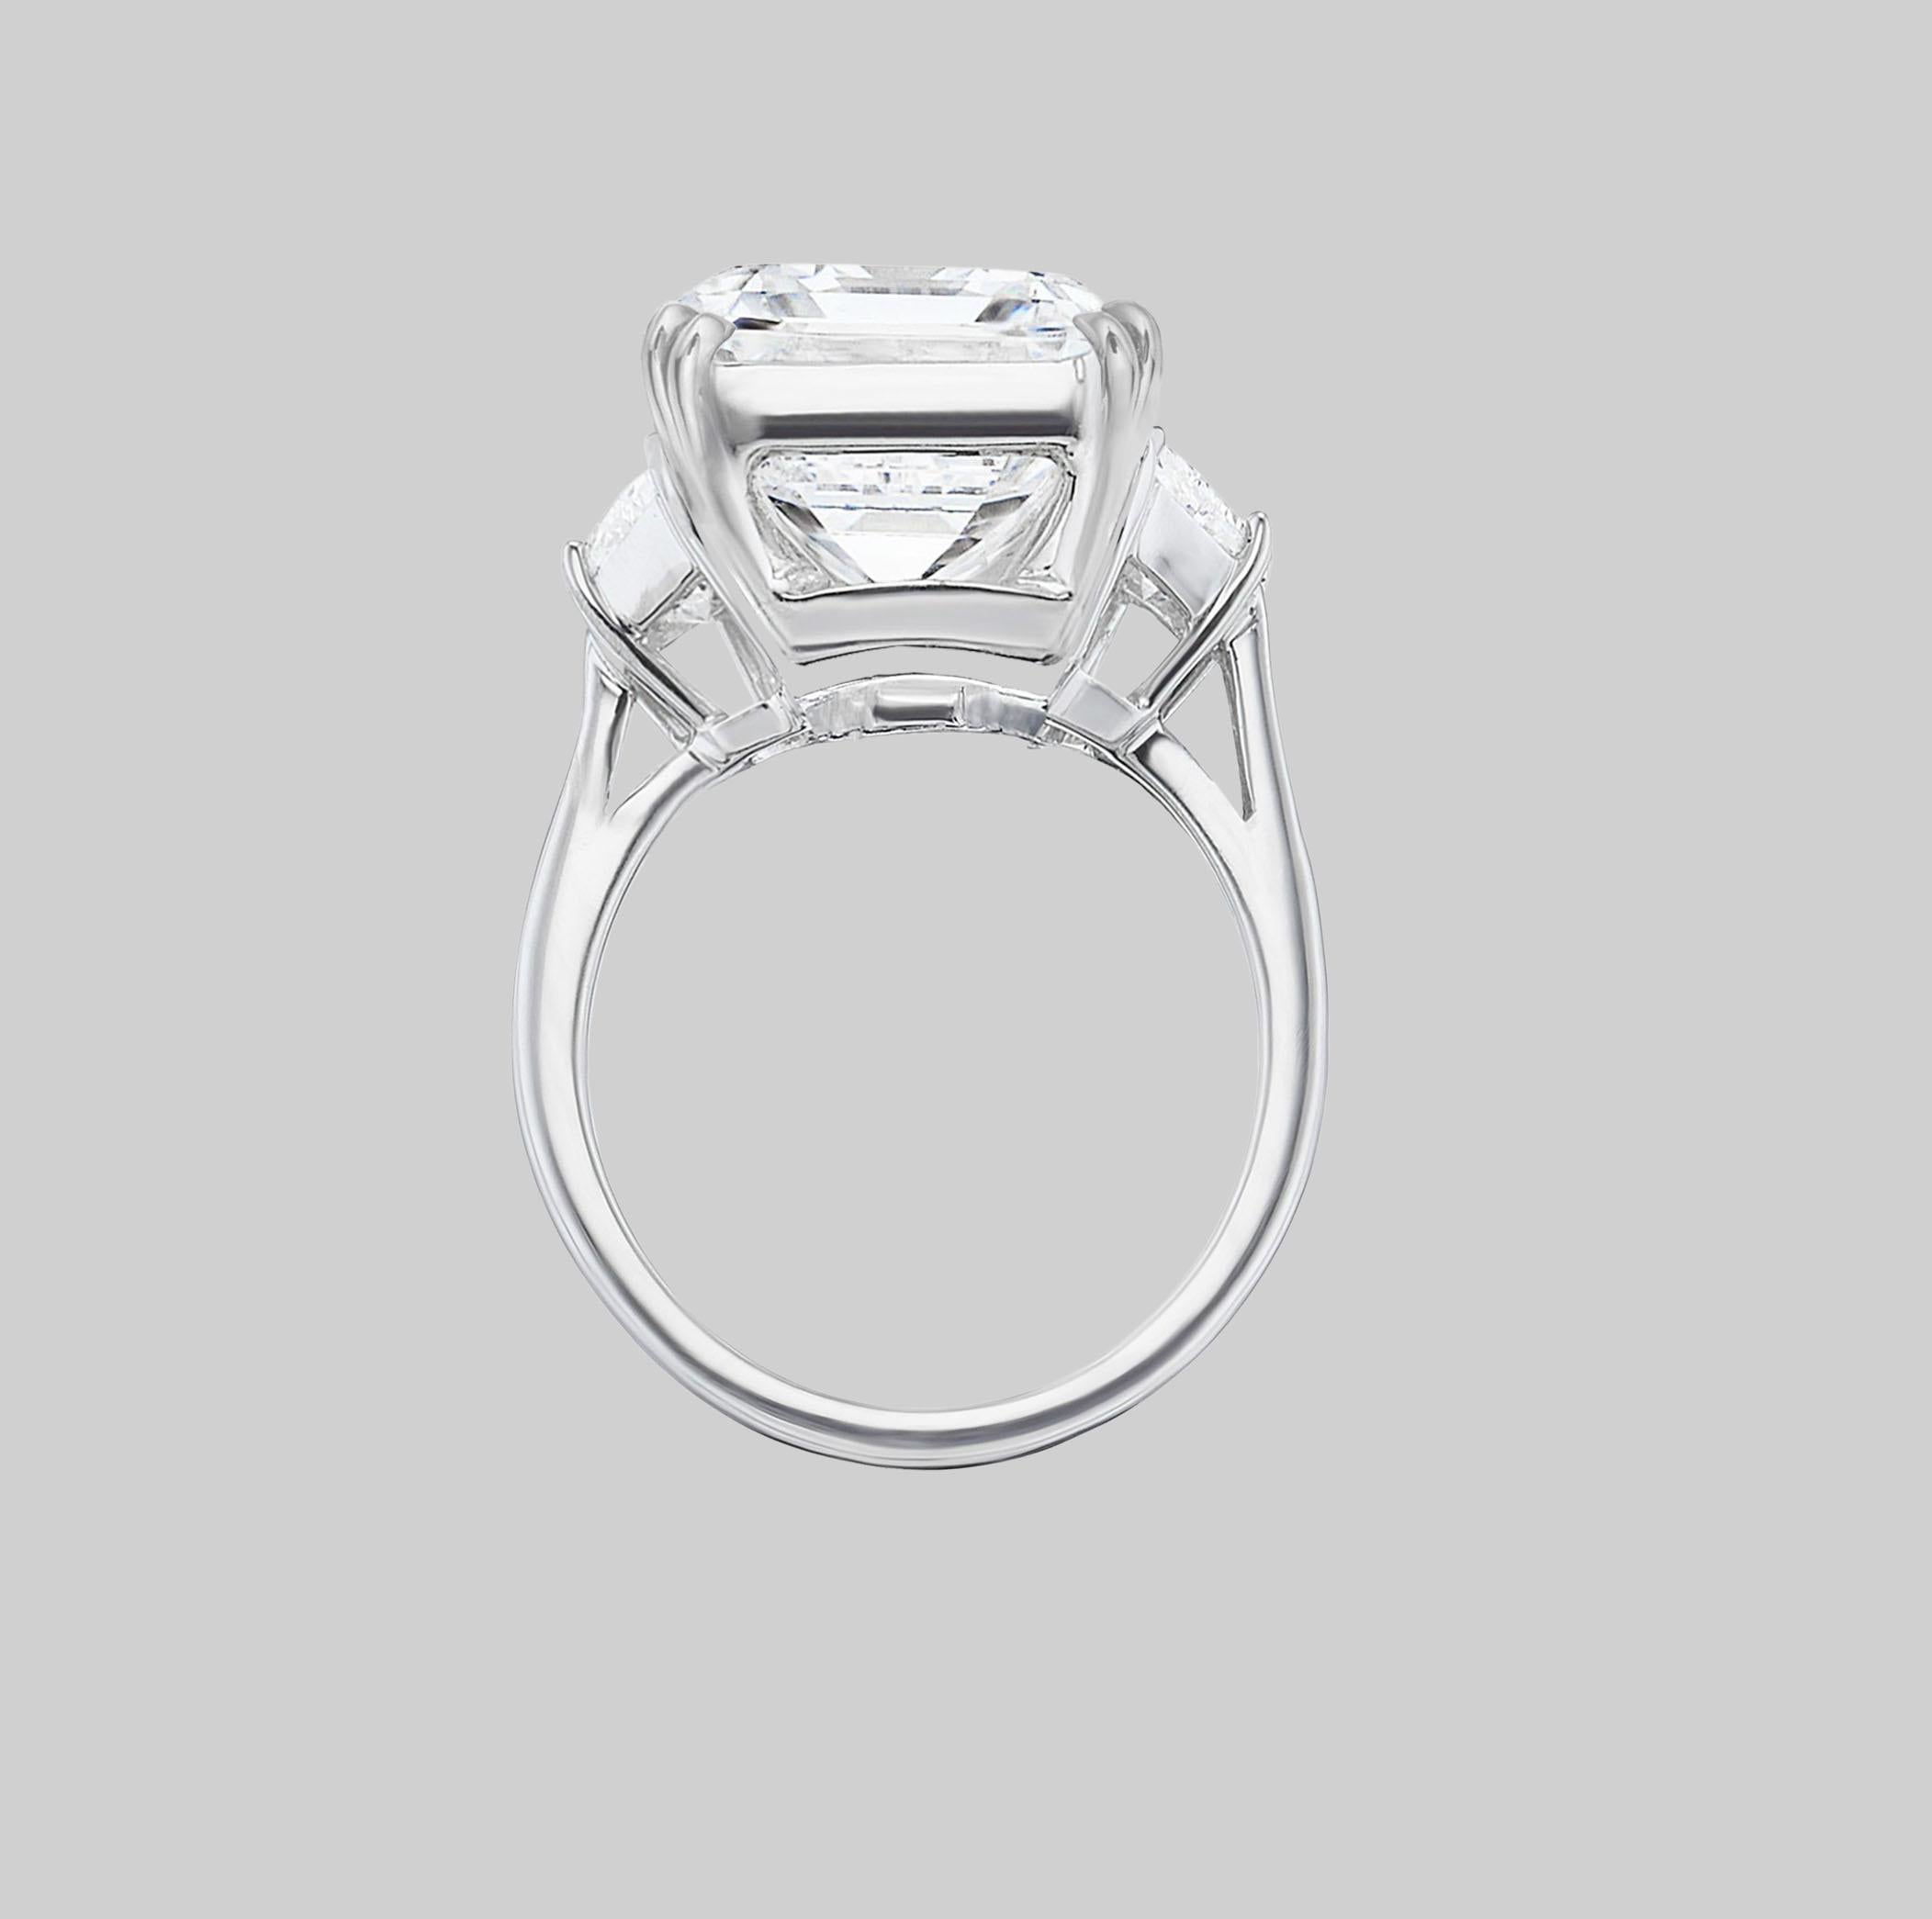 FLAWLESS GIA Certified 6 Carat Emerald Cut Diamond Ring Ideal Proportions